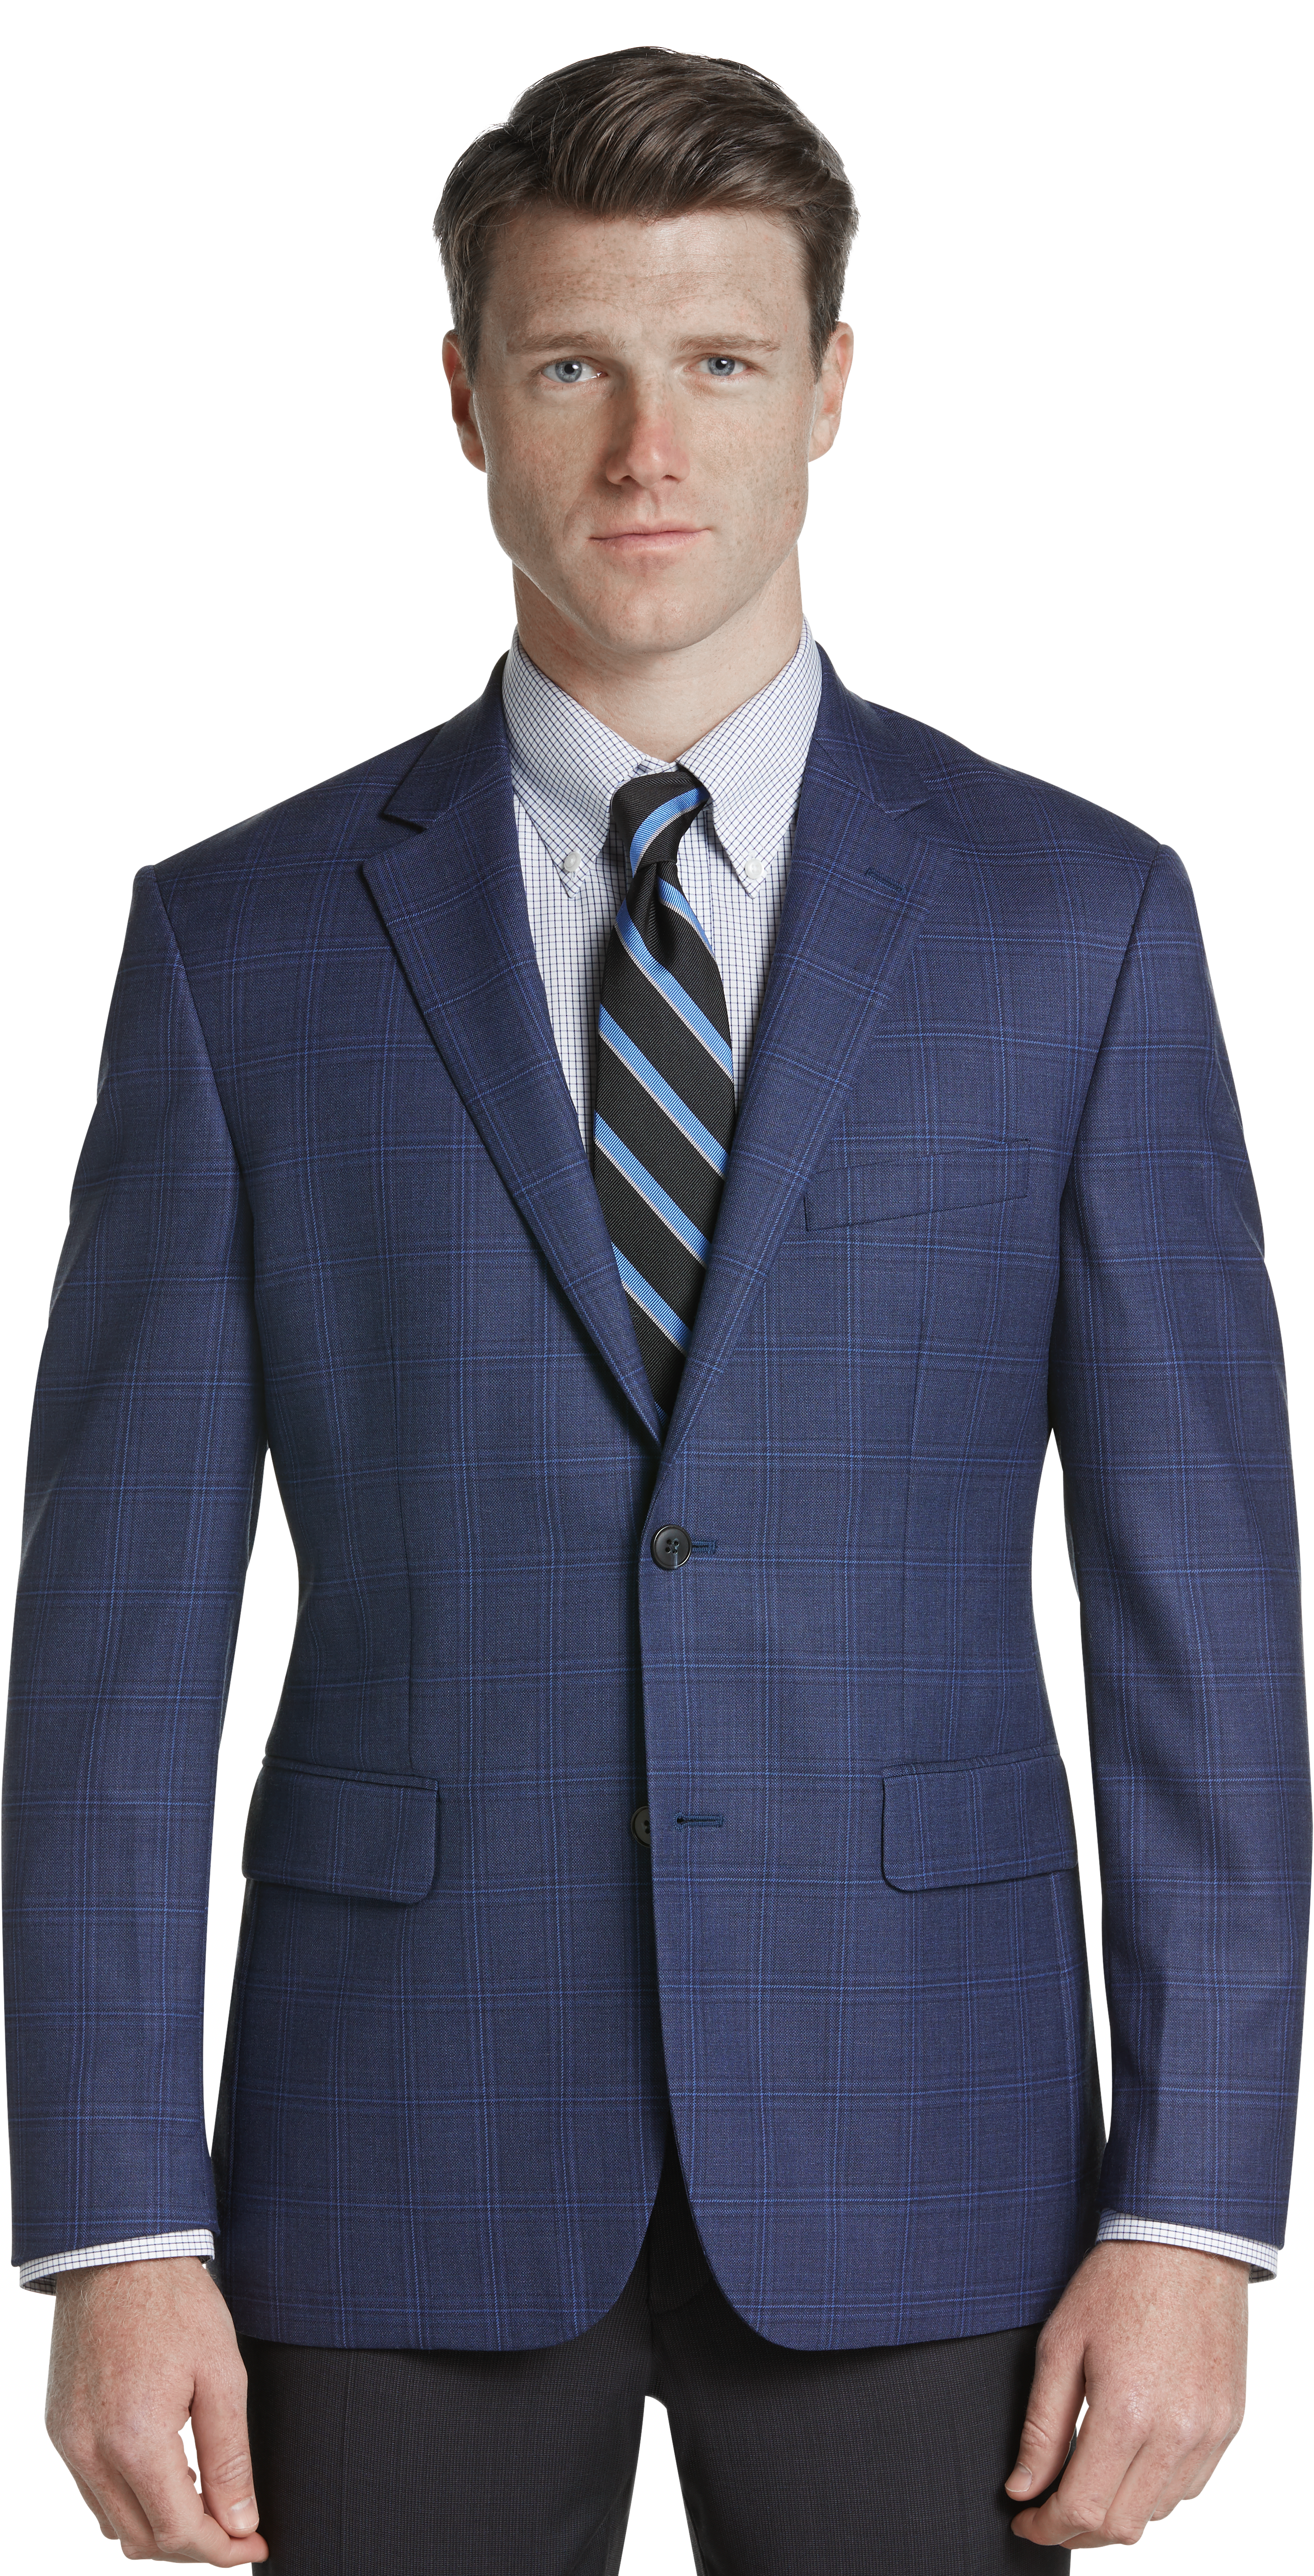 Traveler Collection Tailored Fit Windowpane Sportcoat - Big & Tall ...